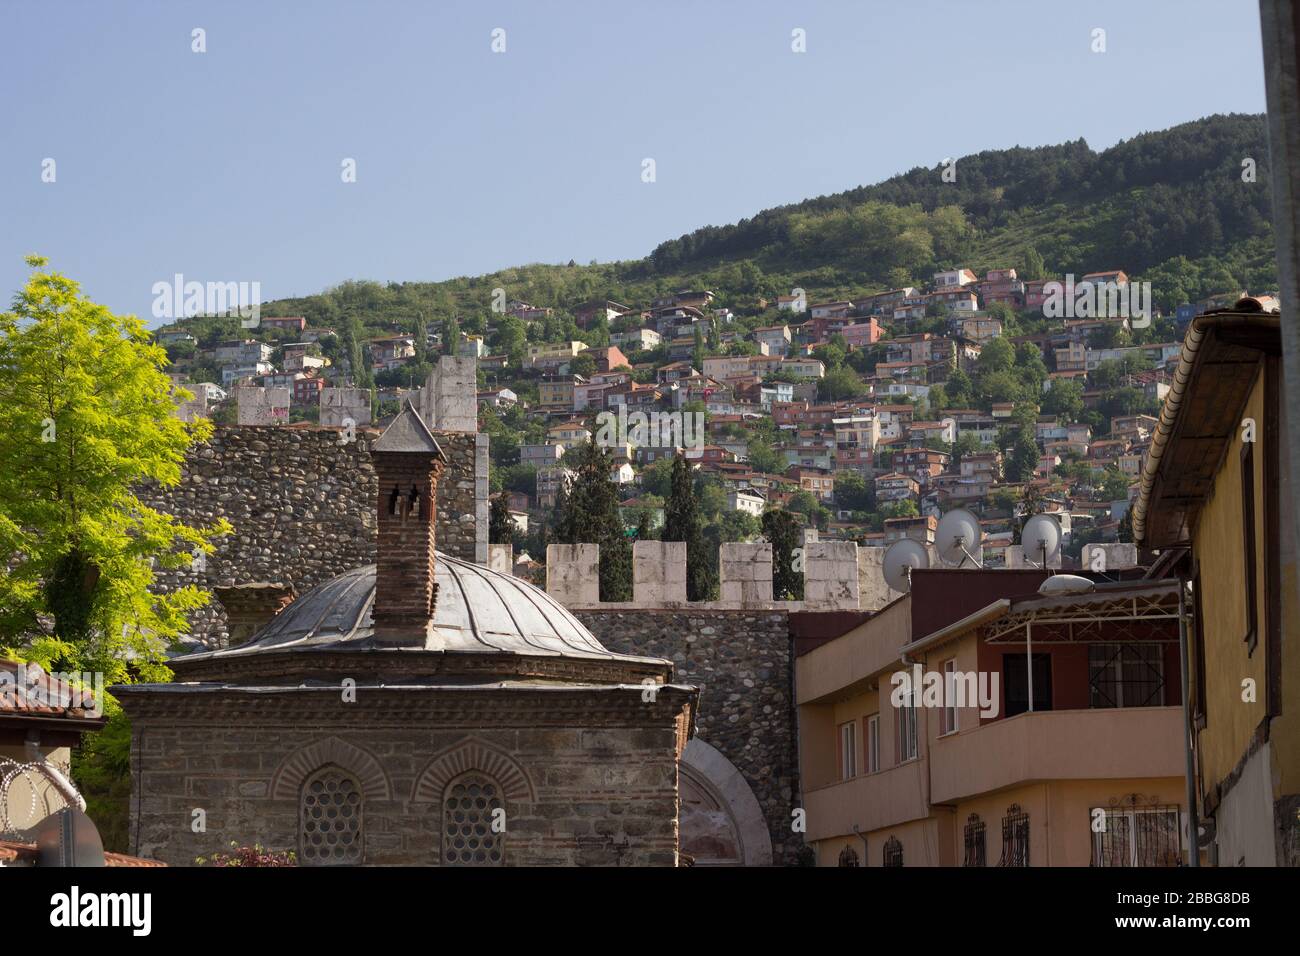 Bursa is one of the biggest city in Turkey, Unfortunately, city planning and architecture is terrible. No enough green section in city. Stock Photo